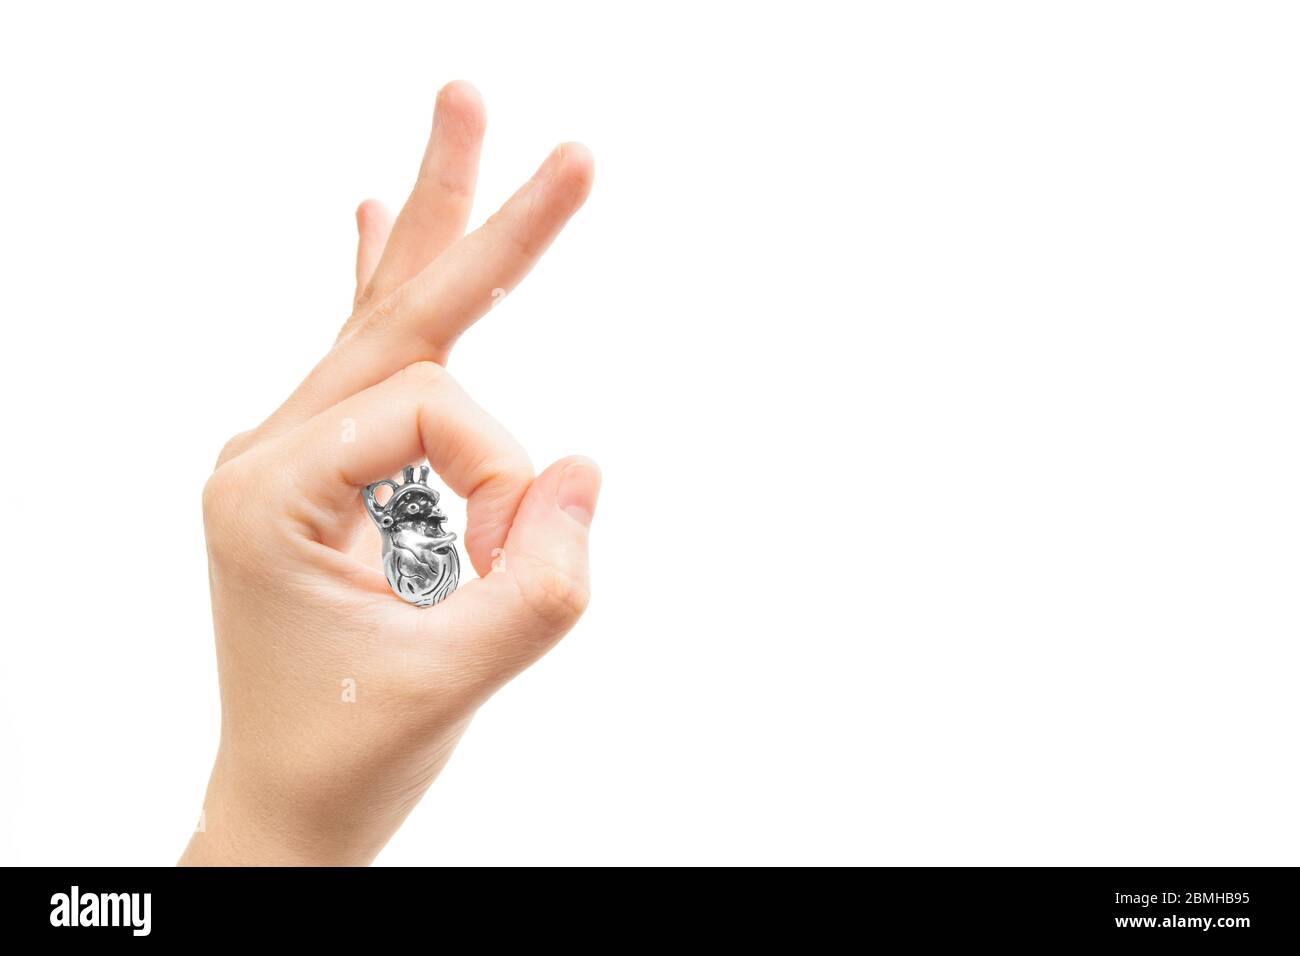 Female hand shows OK ring gesture holding a miniature steel copy of a human heart in the circle between the thumb and index fingers. Stock Photo